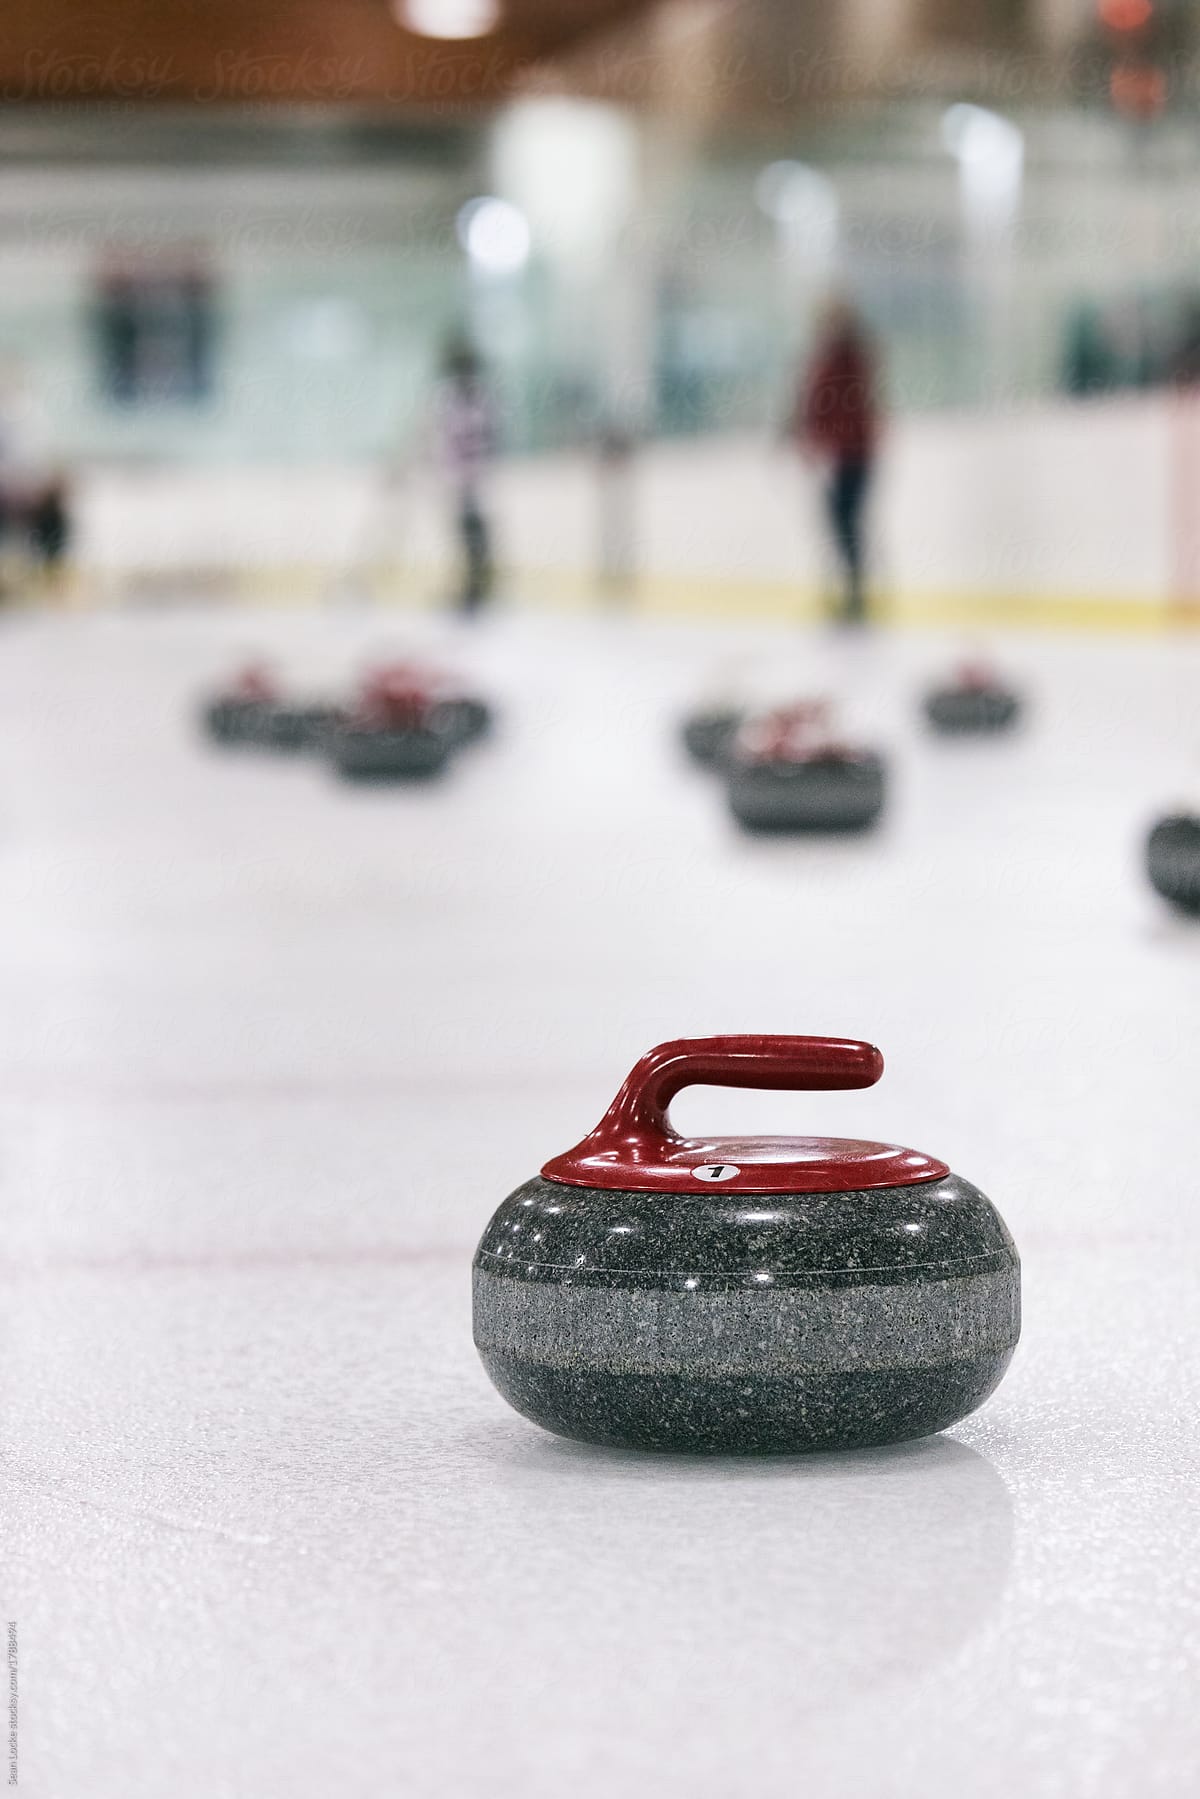 Curling: Thrown Rock Waits At End Of Sheet